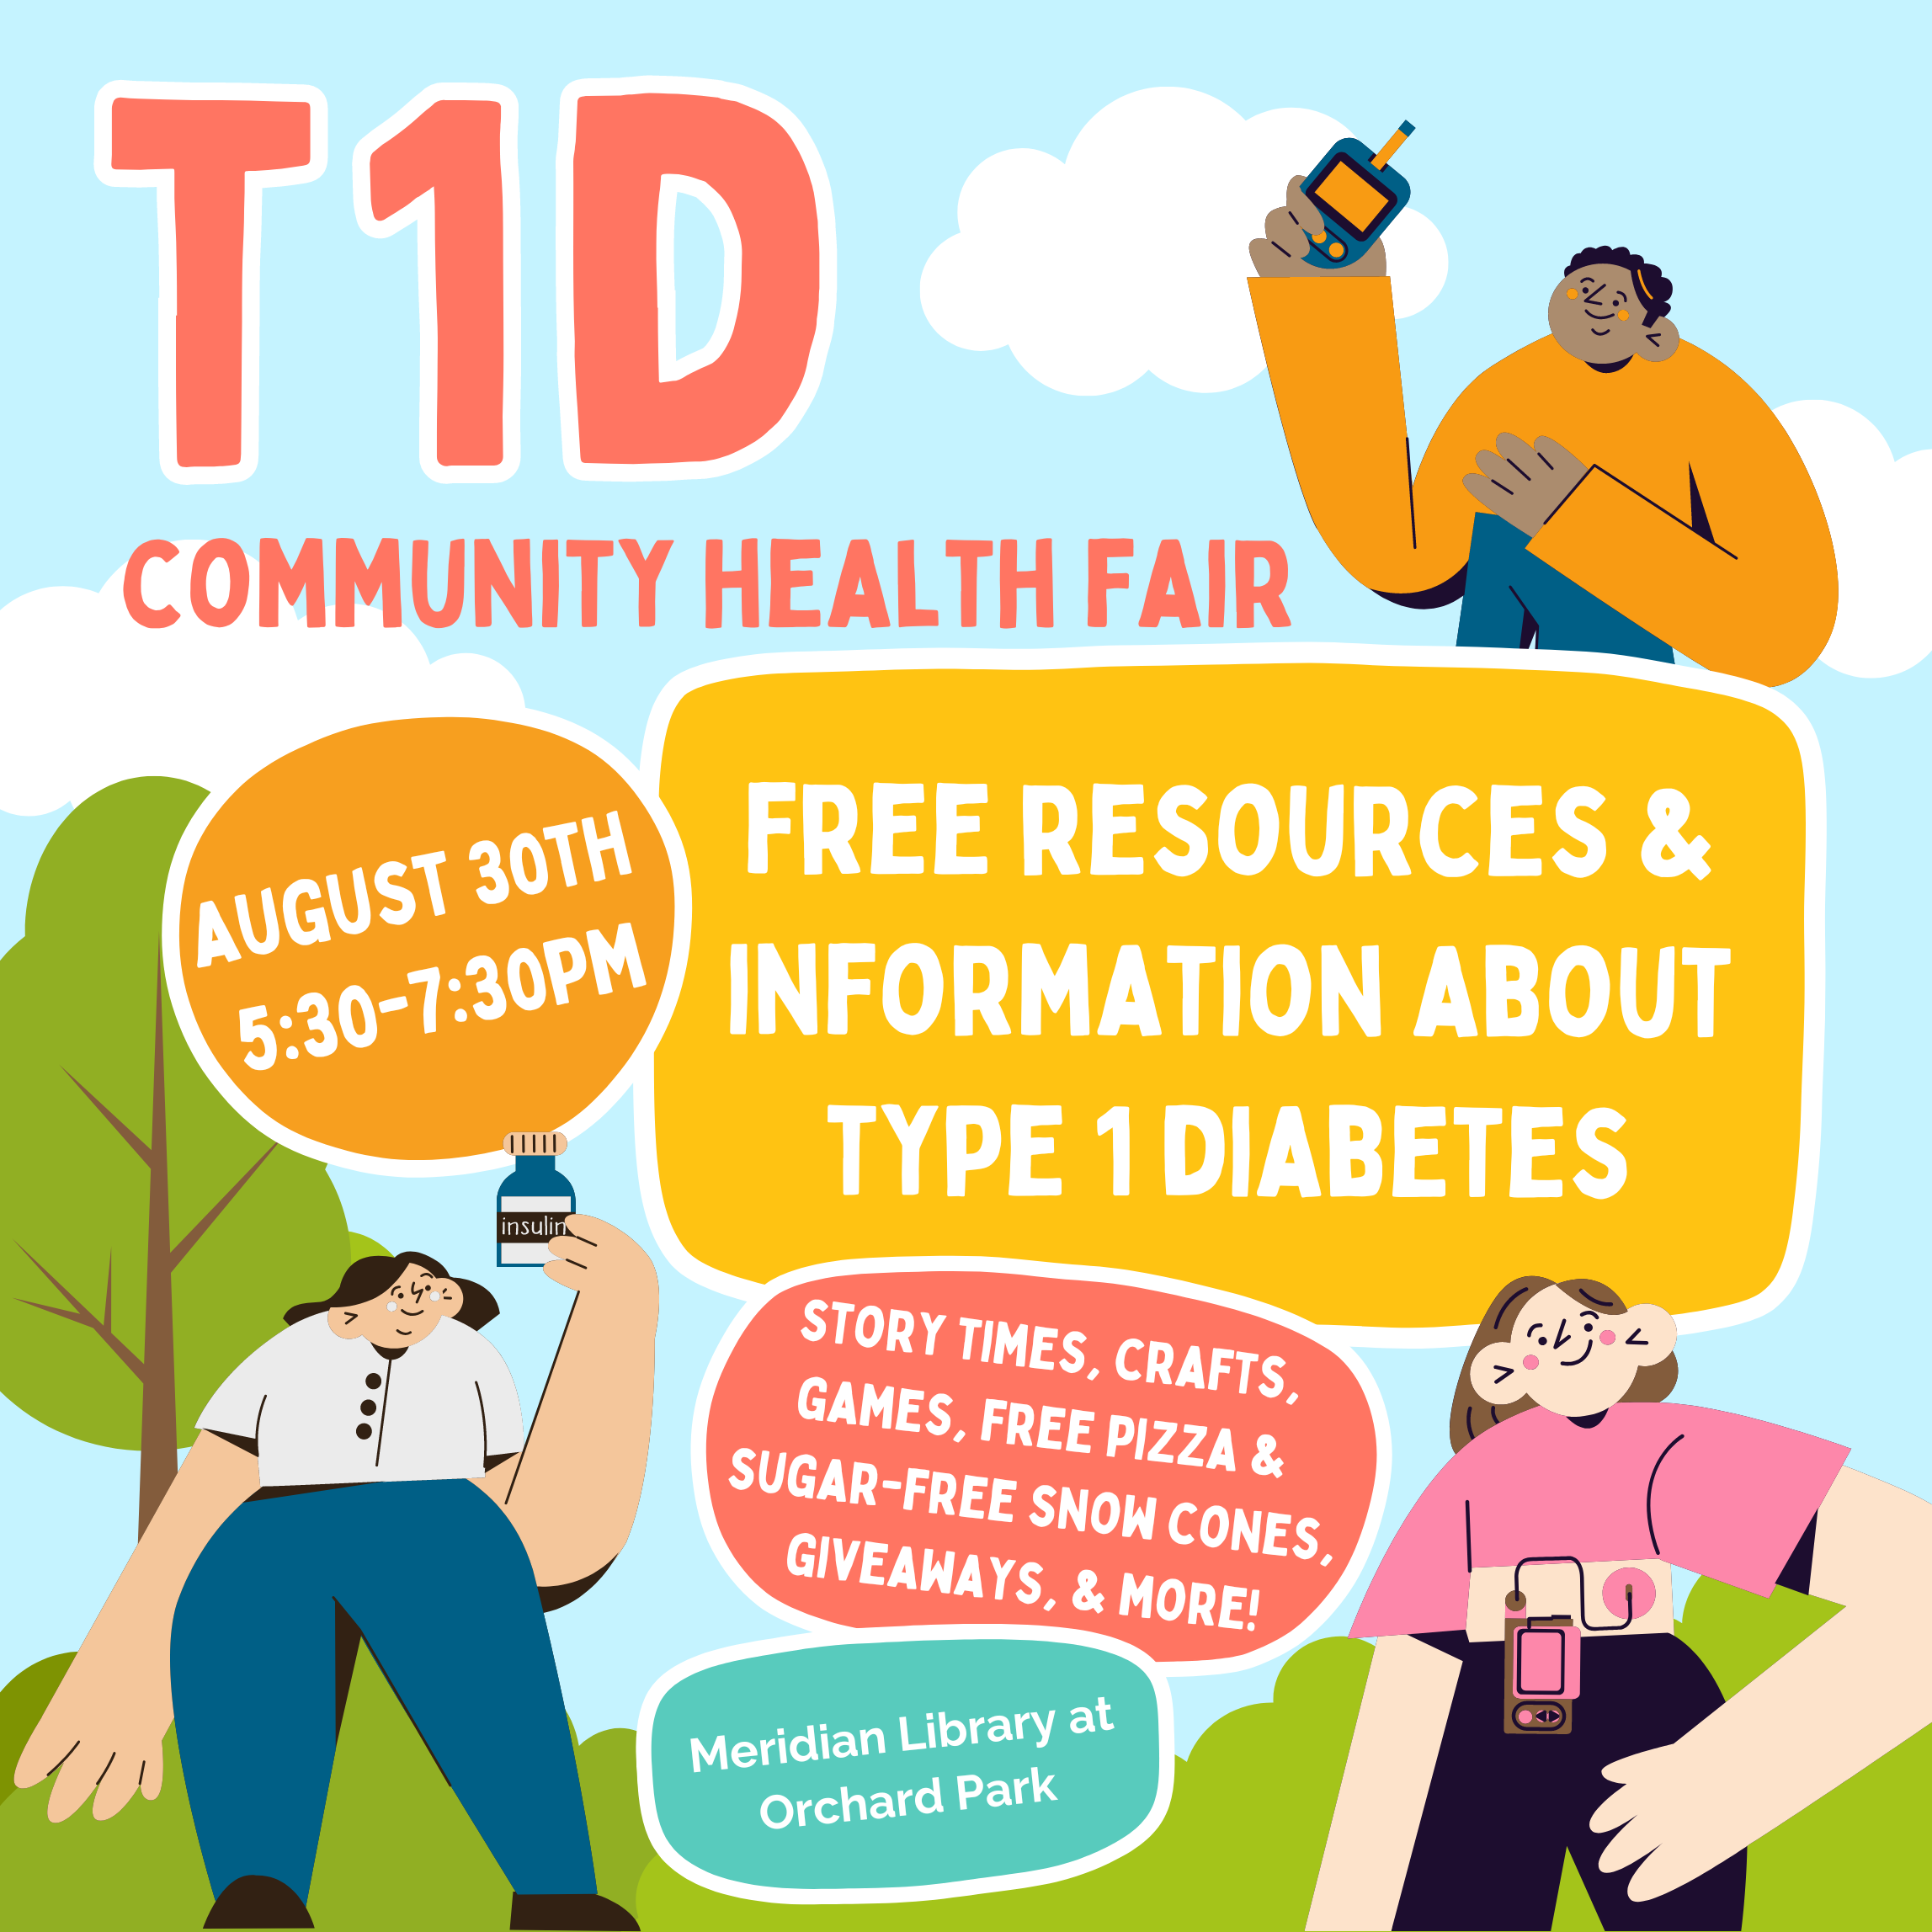 T1D Community Health Fair flyer. Has images of a man with a prick-tester, a woman with a vial of insulin, and a woman with a continuous glucose monitor.